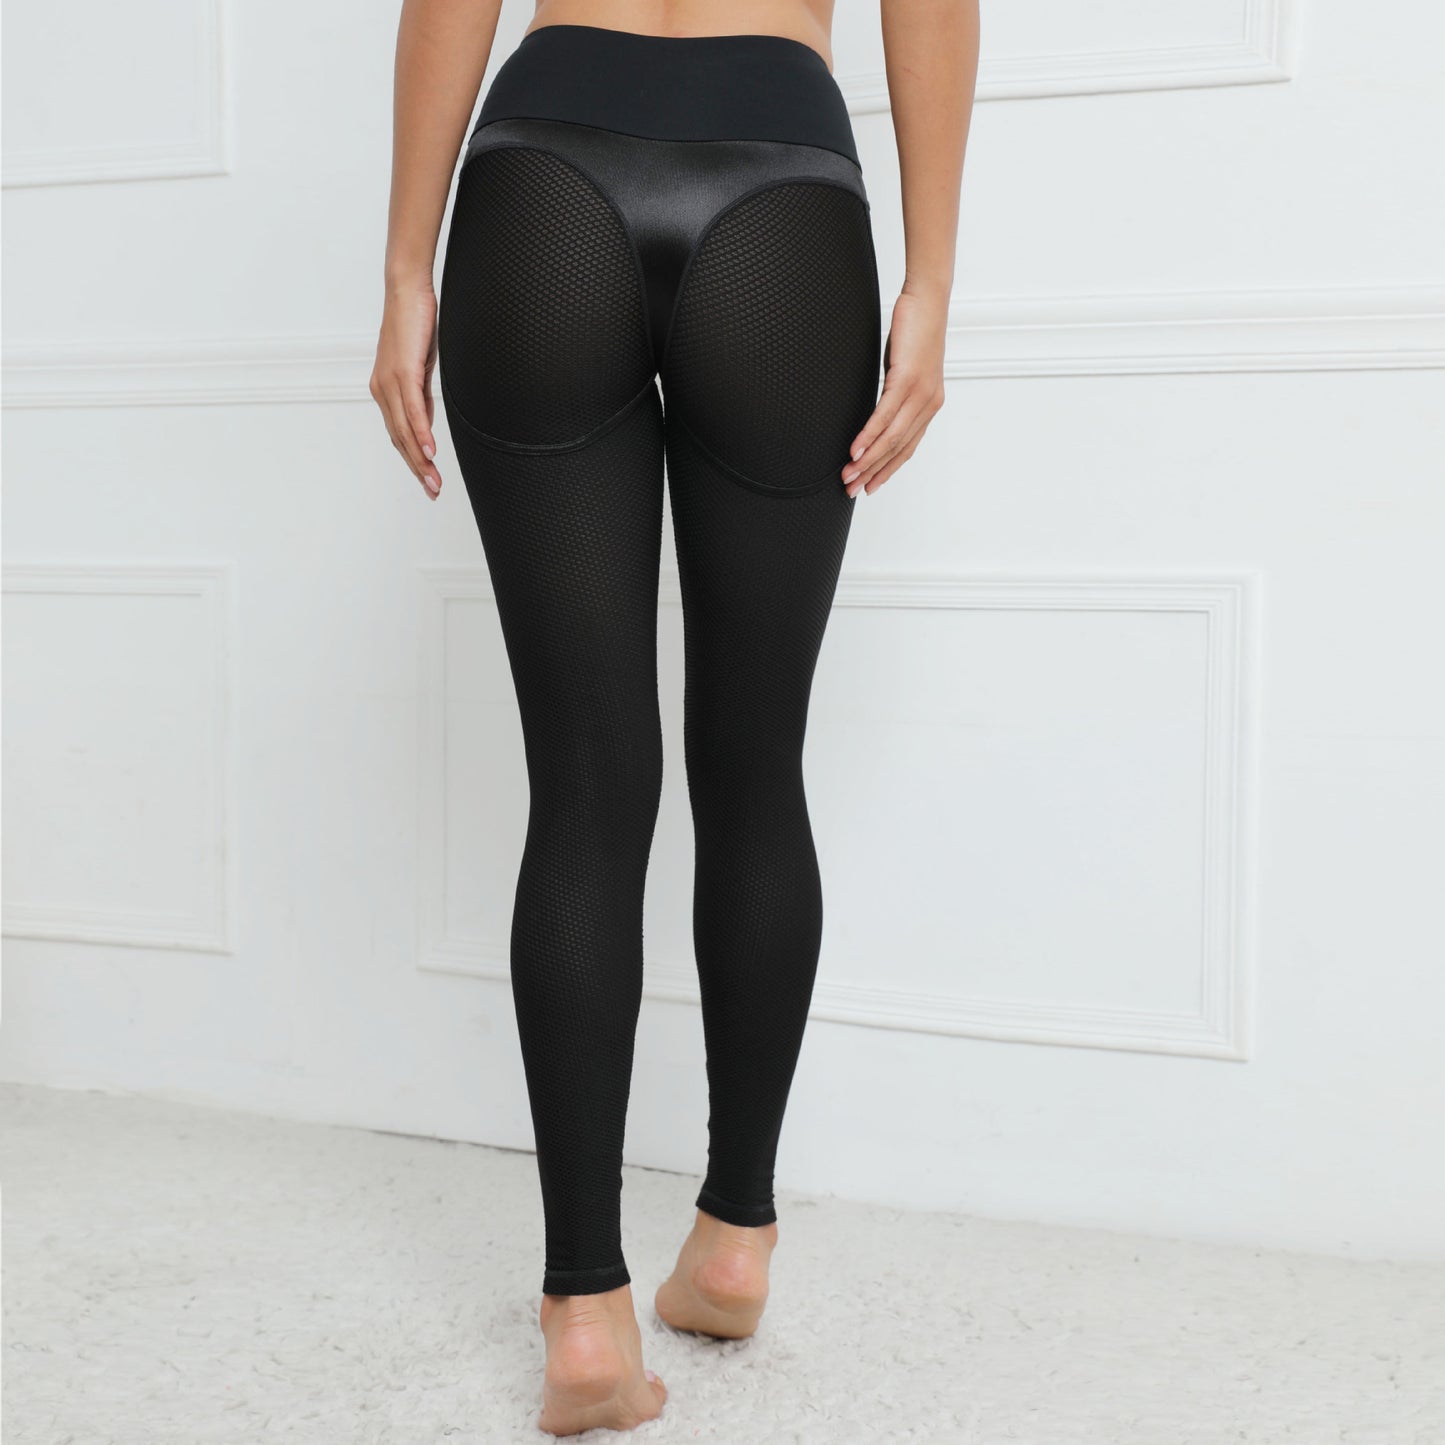 Sexy Black Sports Cropped Leggings for Women